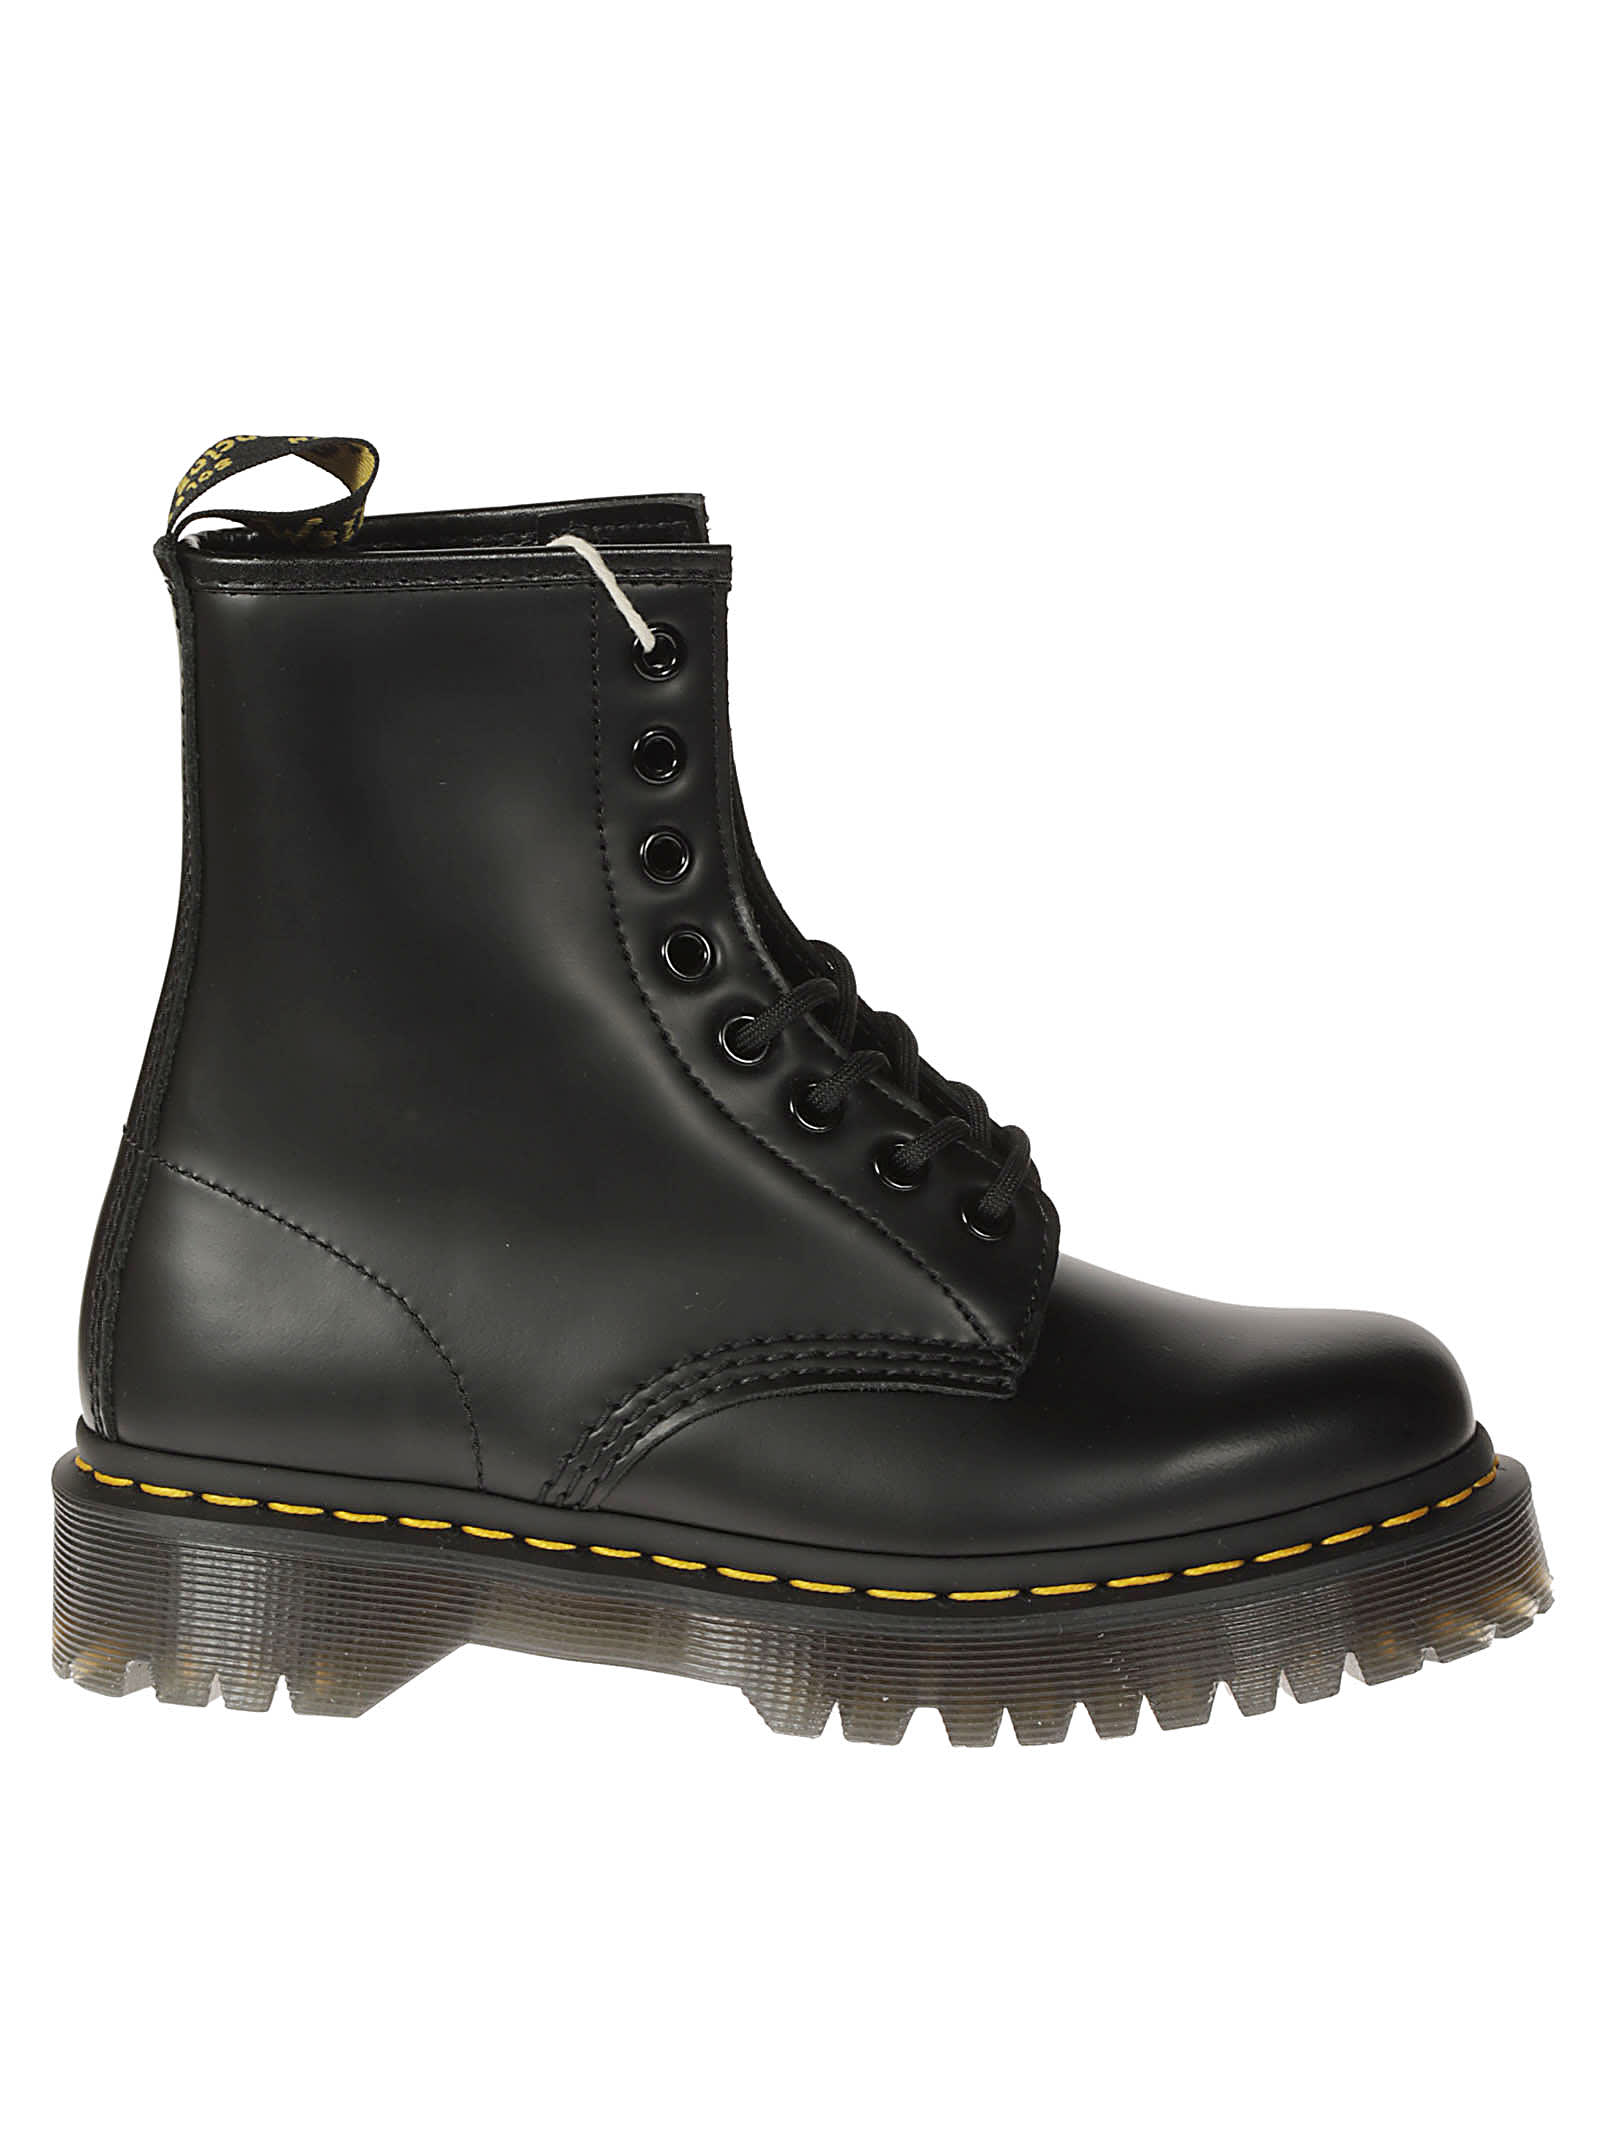 Buy Dr. Martens Core Box Lace-up Boots online, shop Dr. Martens shoes with free shipping